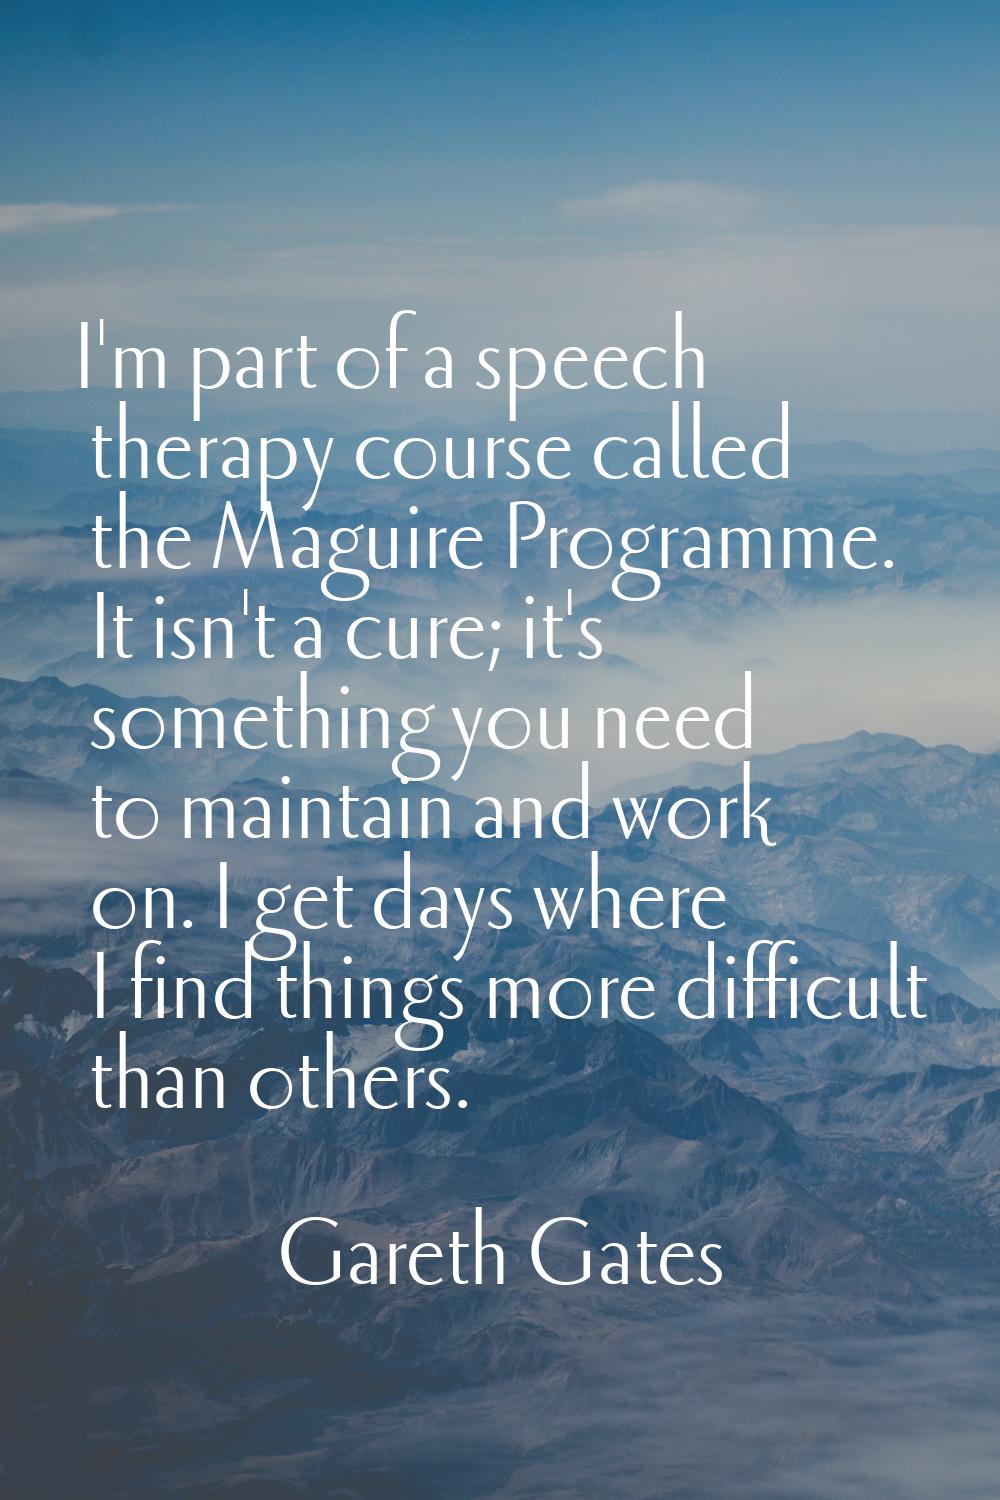 I'm part of a speech therapy course called the Maguire Programme. It isn't a cure; it's something y